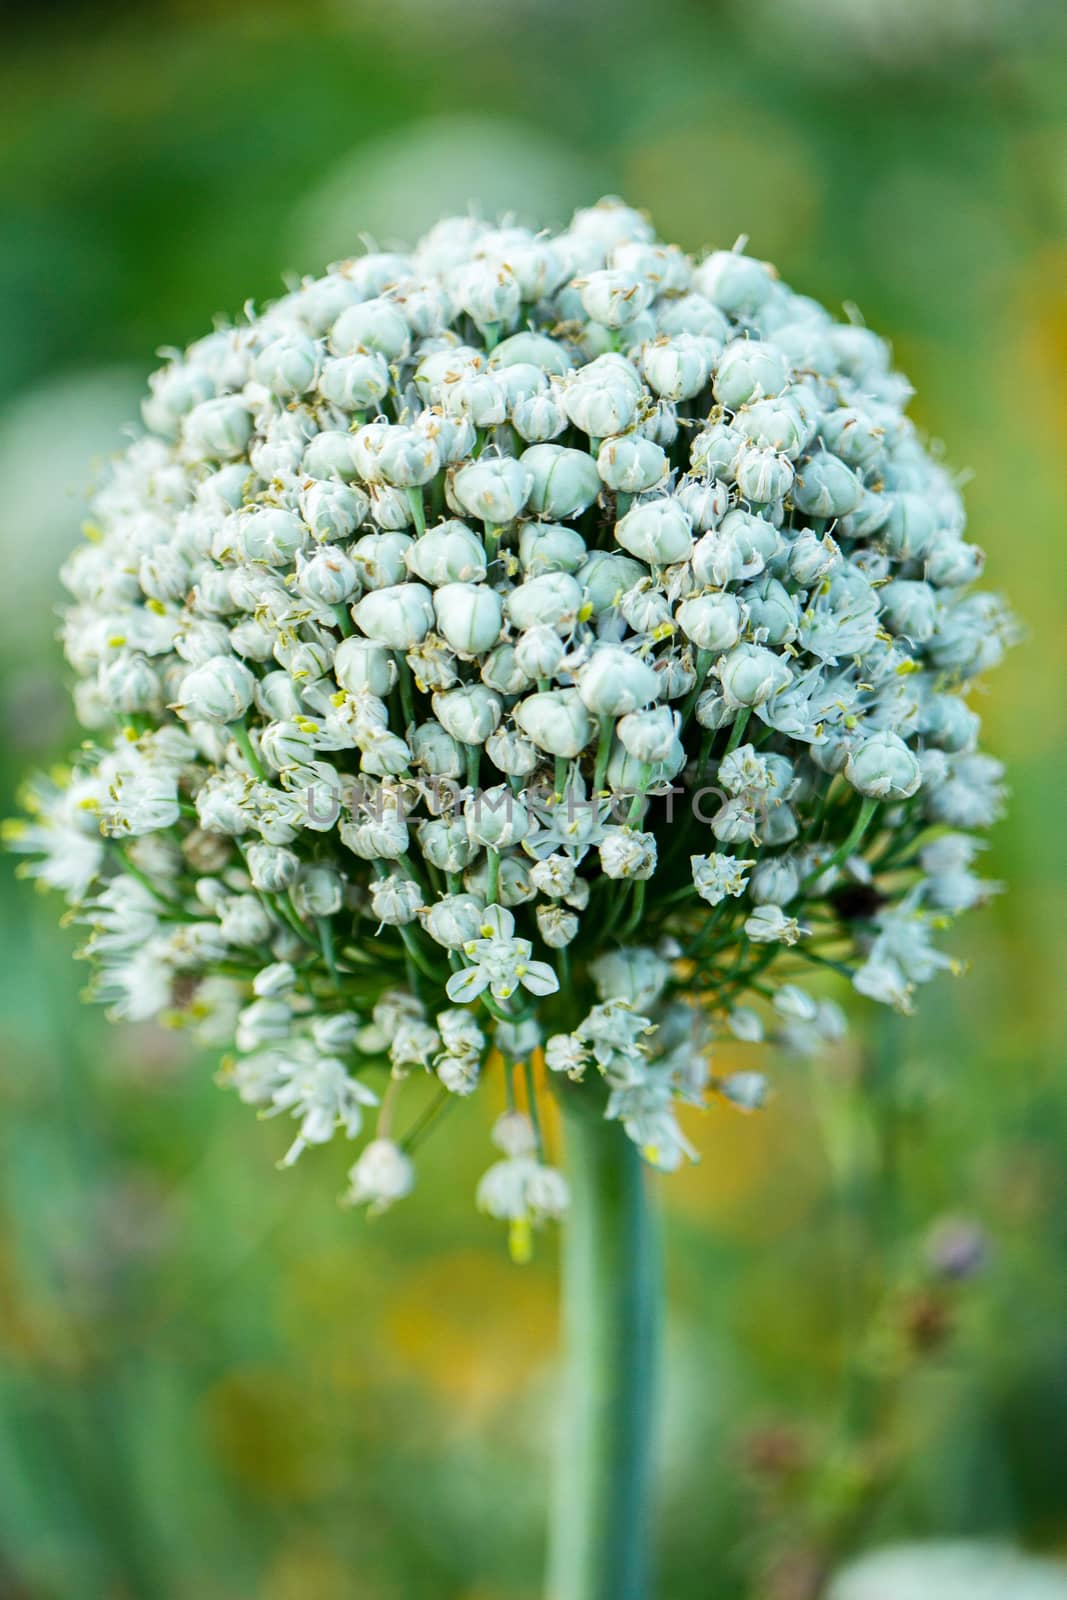 A beautiful bunch of white flowers with a high green stem on the background of a green stone by Adamchuk